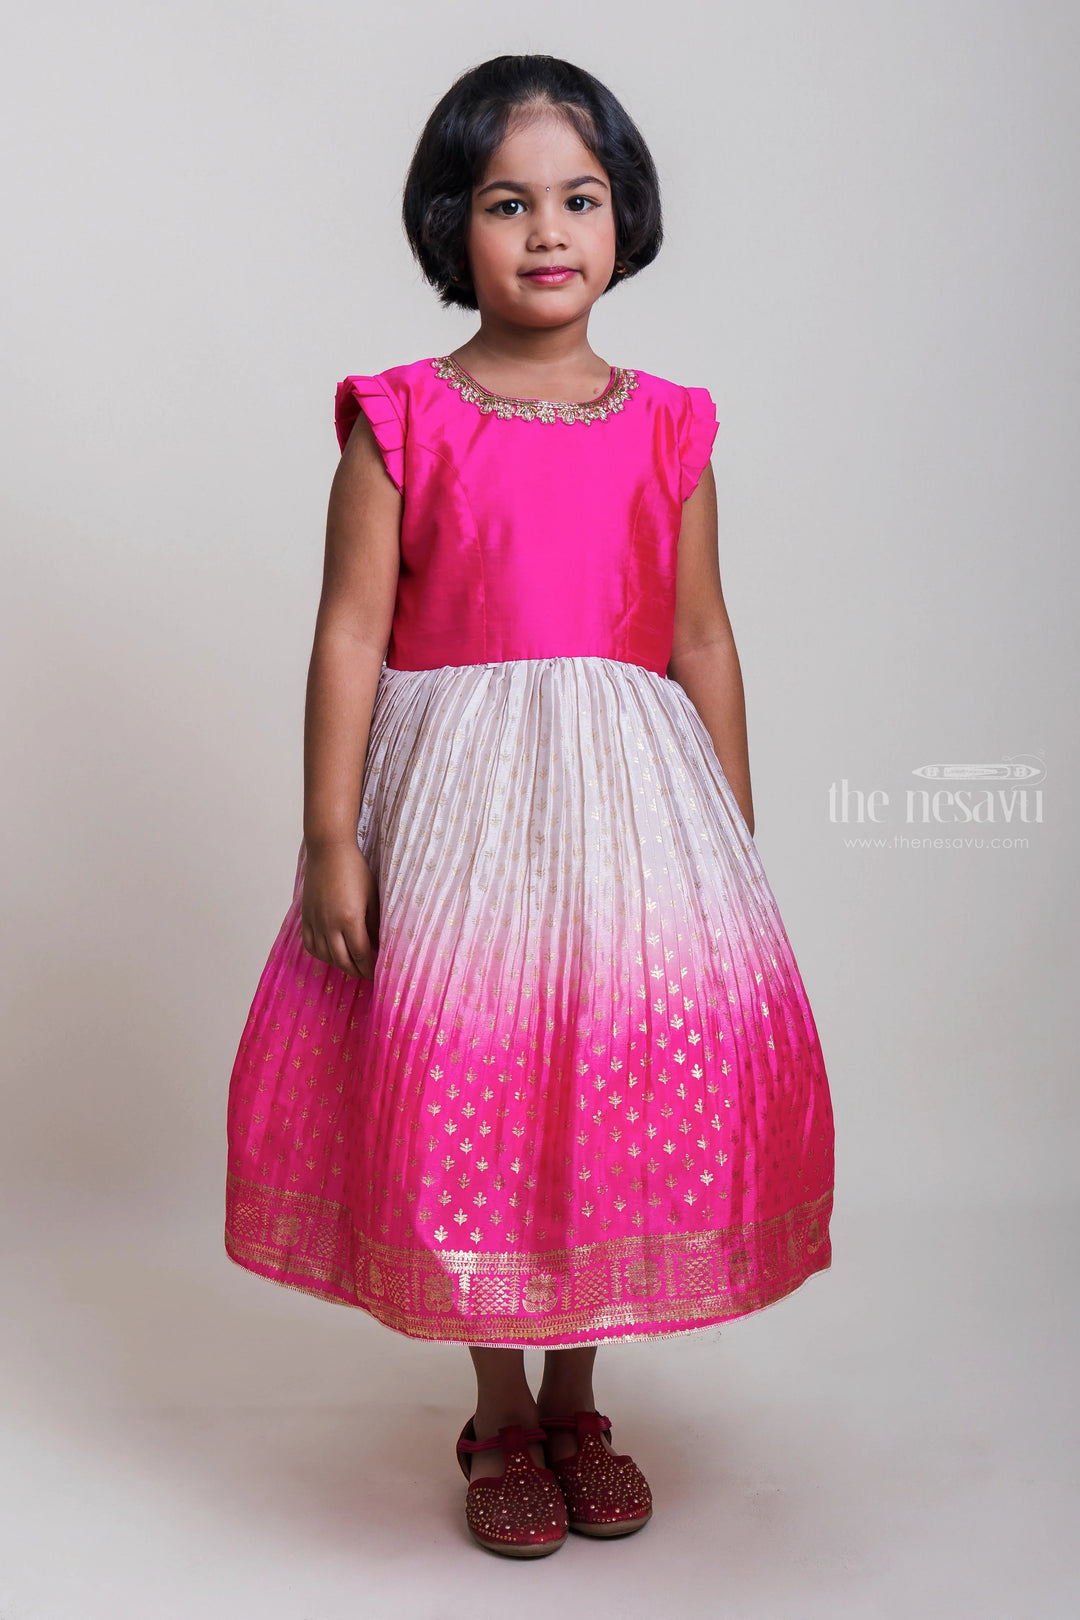 The Nesavu Silk Party Frock Pink Celebration Frock in Foil Printed Pleated Chinon Silk for Baby Girl Nesavu 16 (1Y) / Pink SF233-16 Baby Girl Comfy Daily Wear | Shop Sleeveless Cotton Gowns | The Nesavu